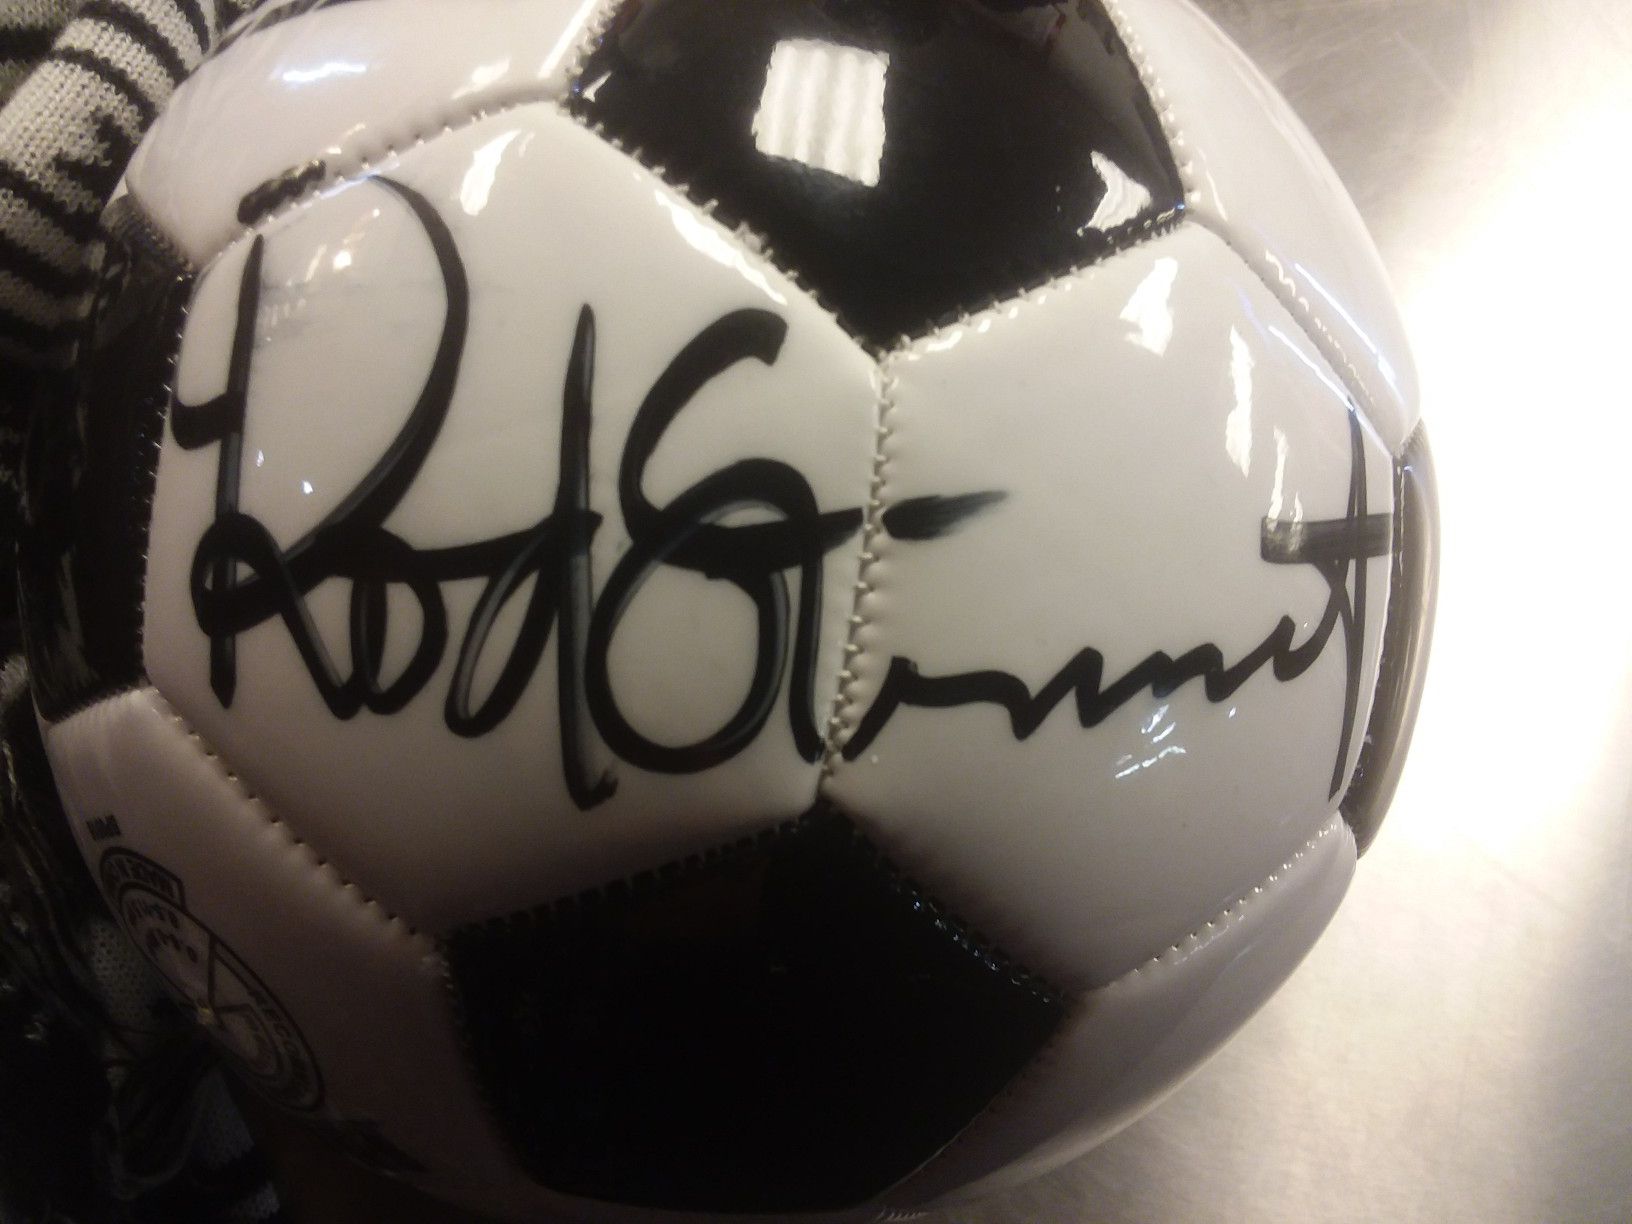 Authentic autographed Rod Stewart soccer ball - 400 OBO